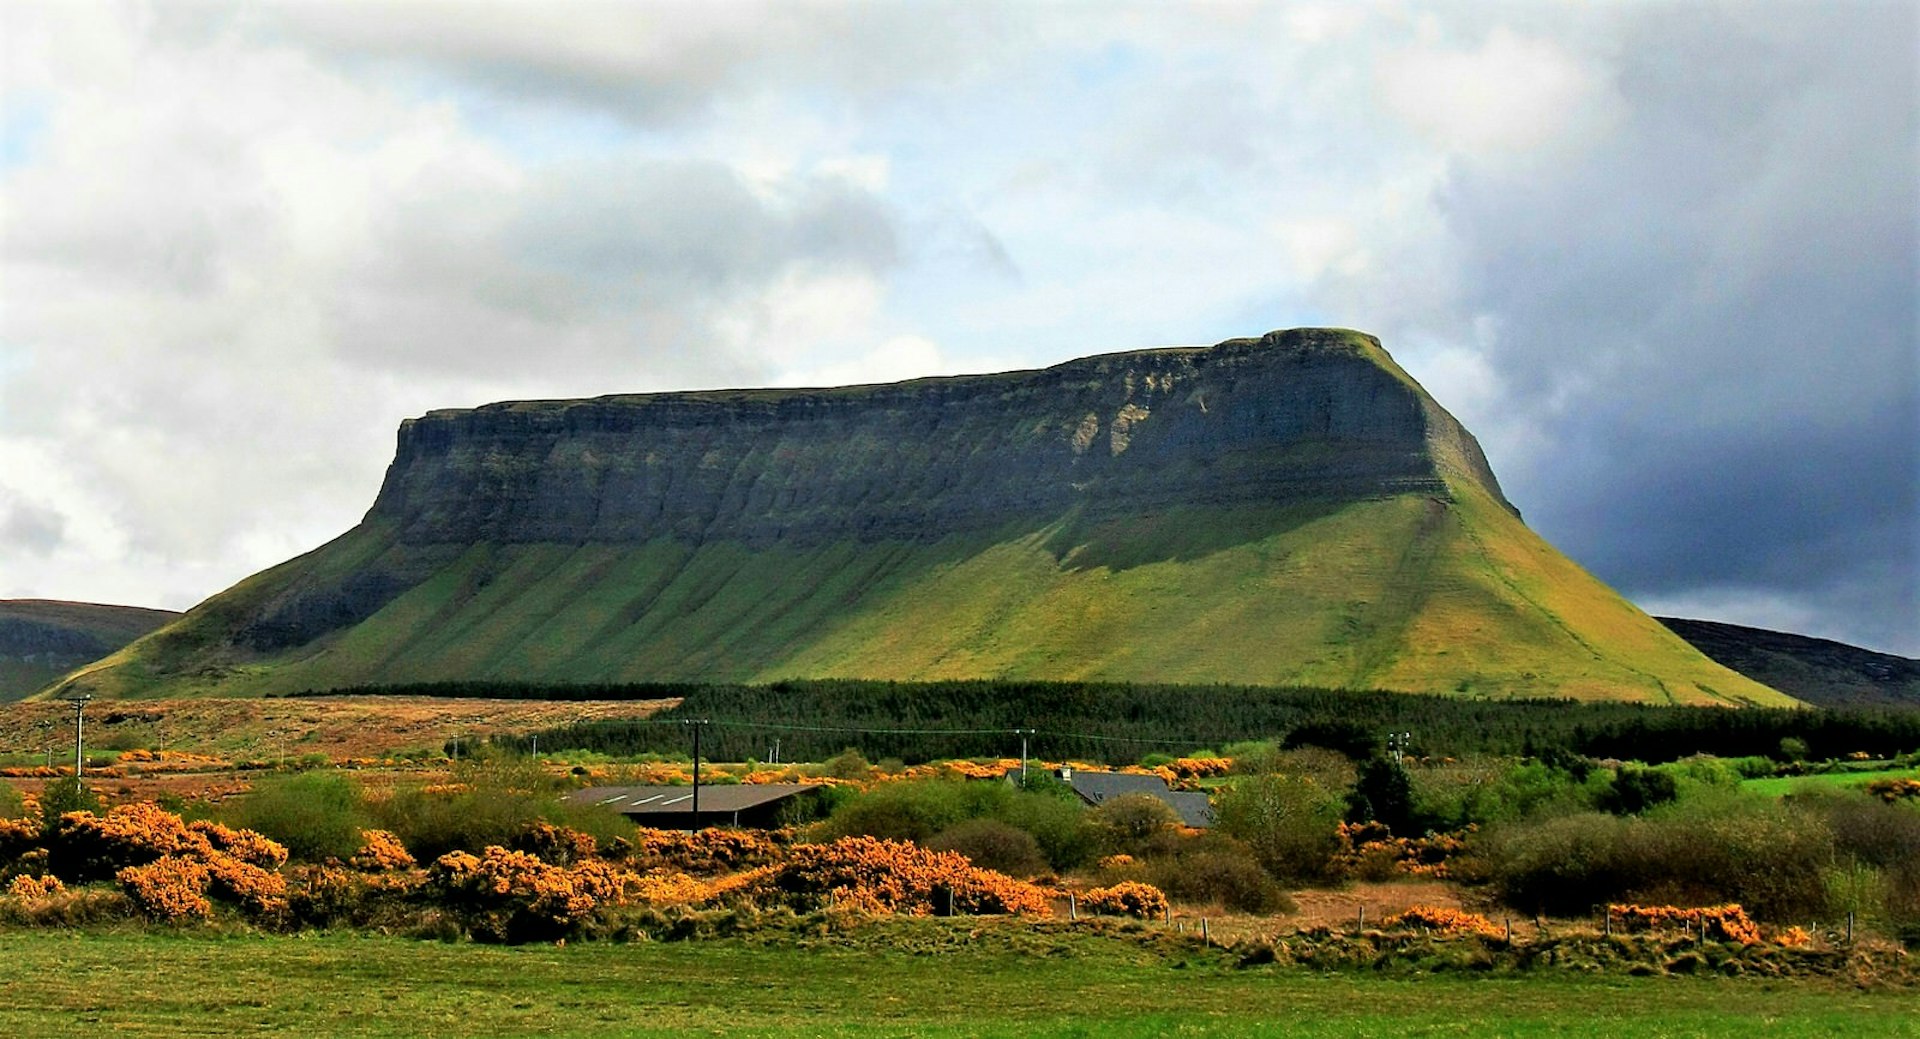 According to legend, the mountain of Benbulben is home to many fairies. Benbulben is a dramatic tabletop mountain in Sligo, Ireland.